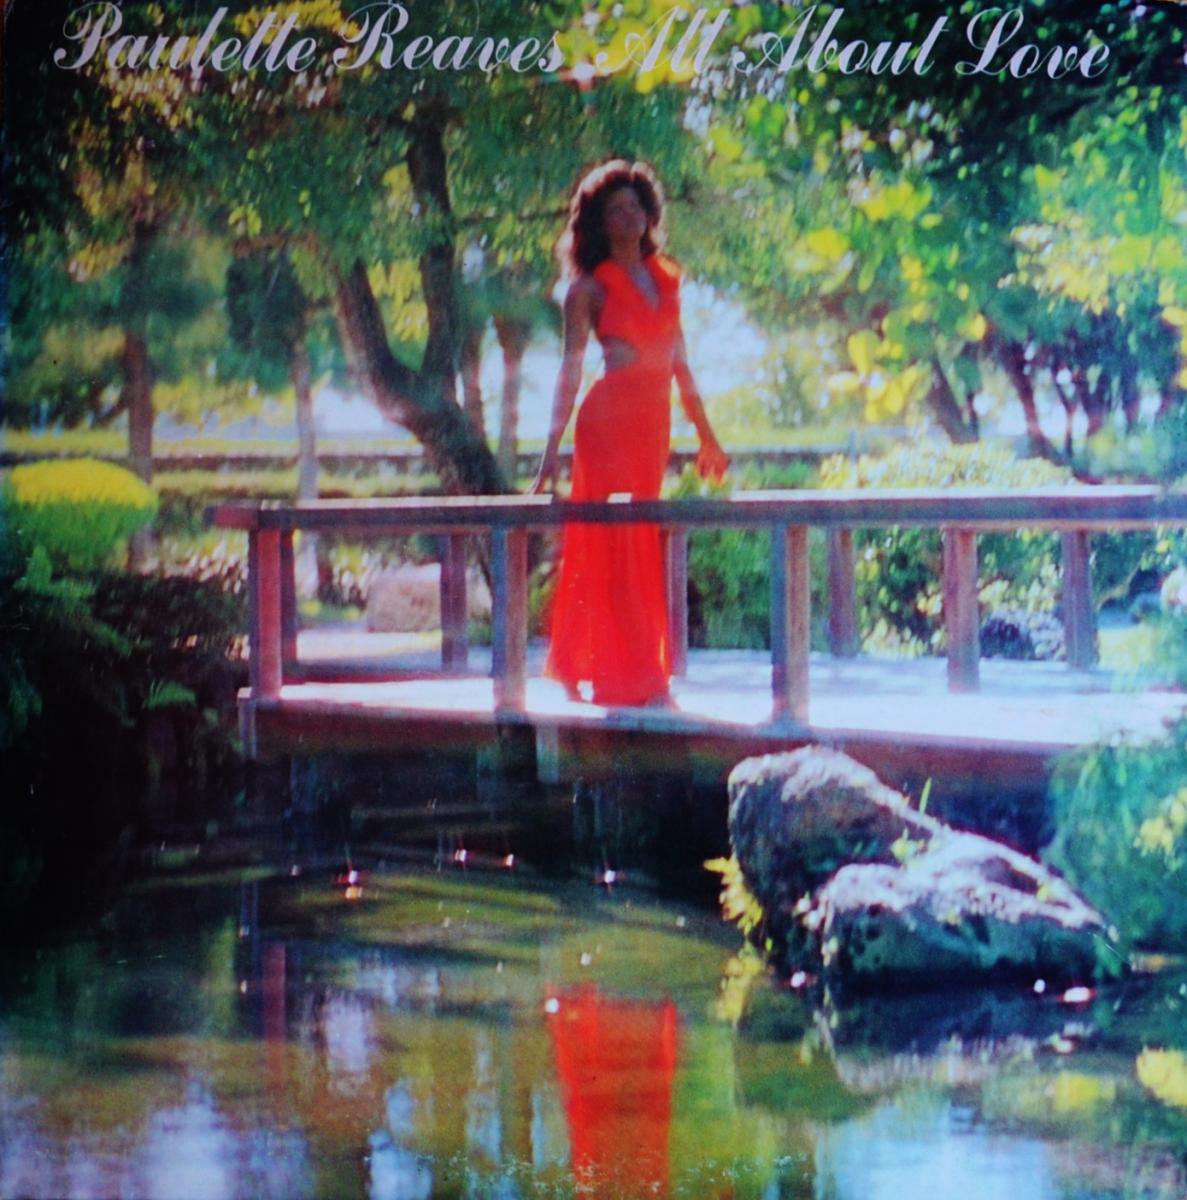 PAULETTE REAVES / ALL ABOUT LOVE (LP)